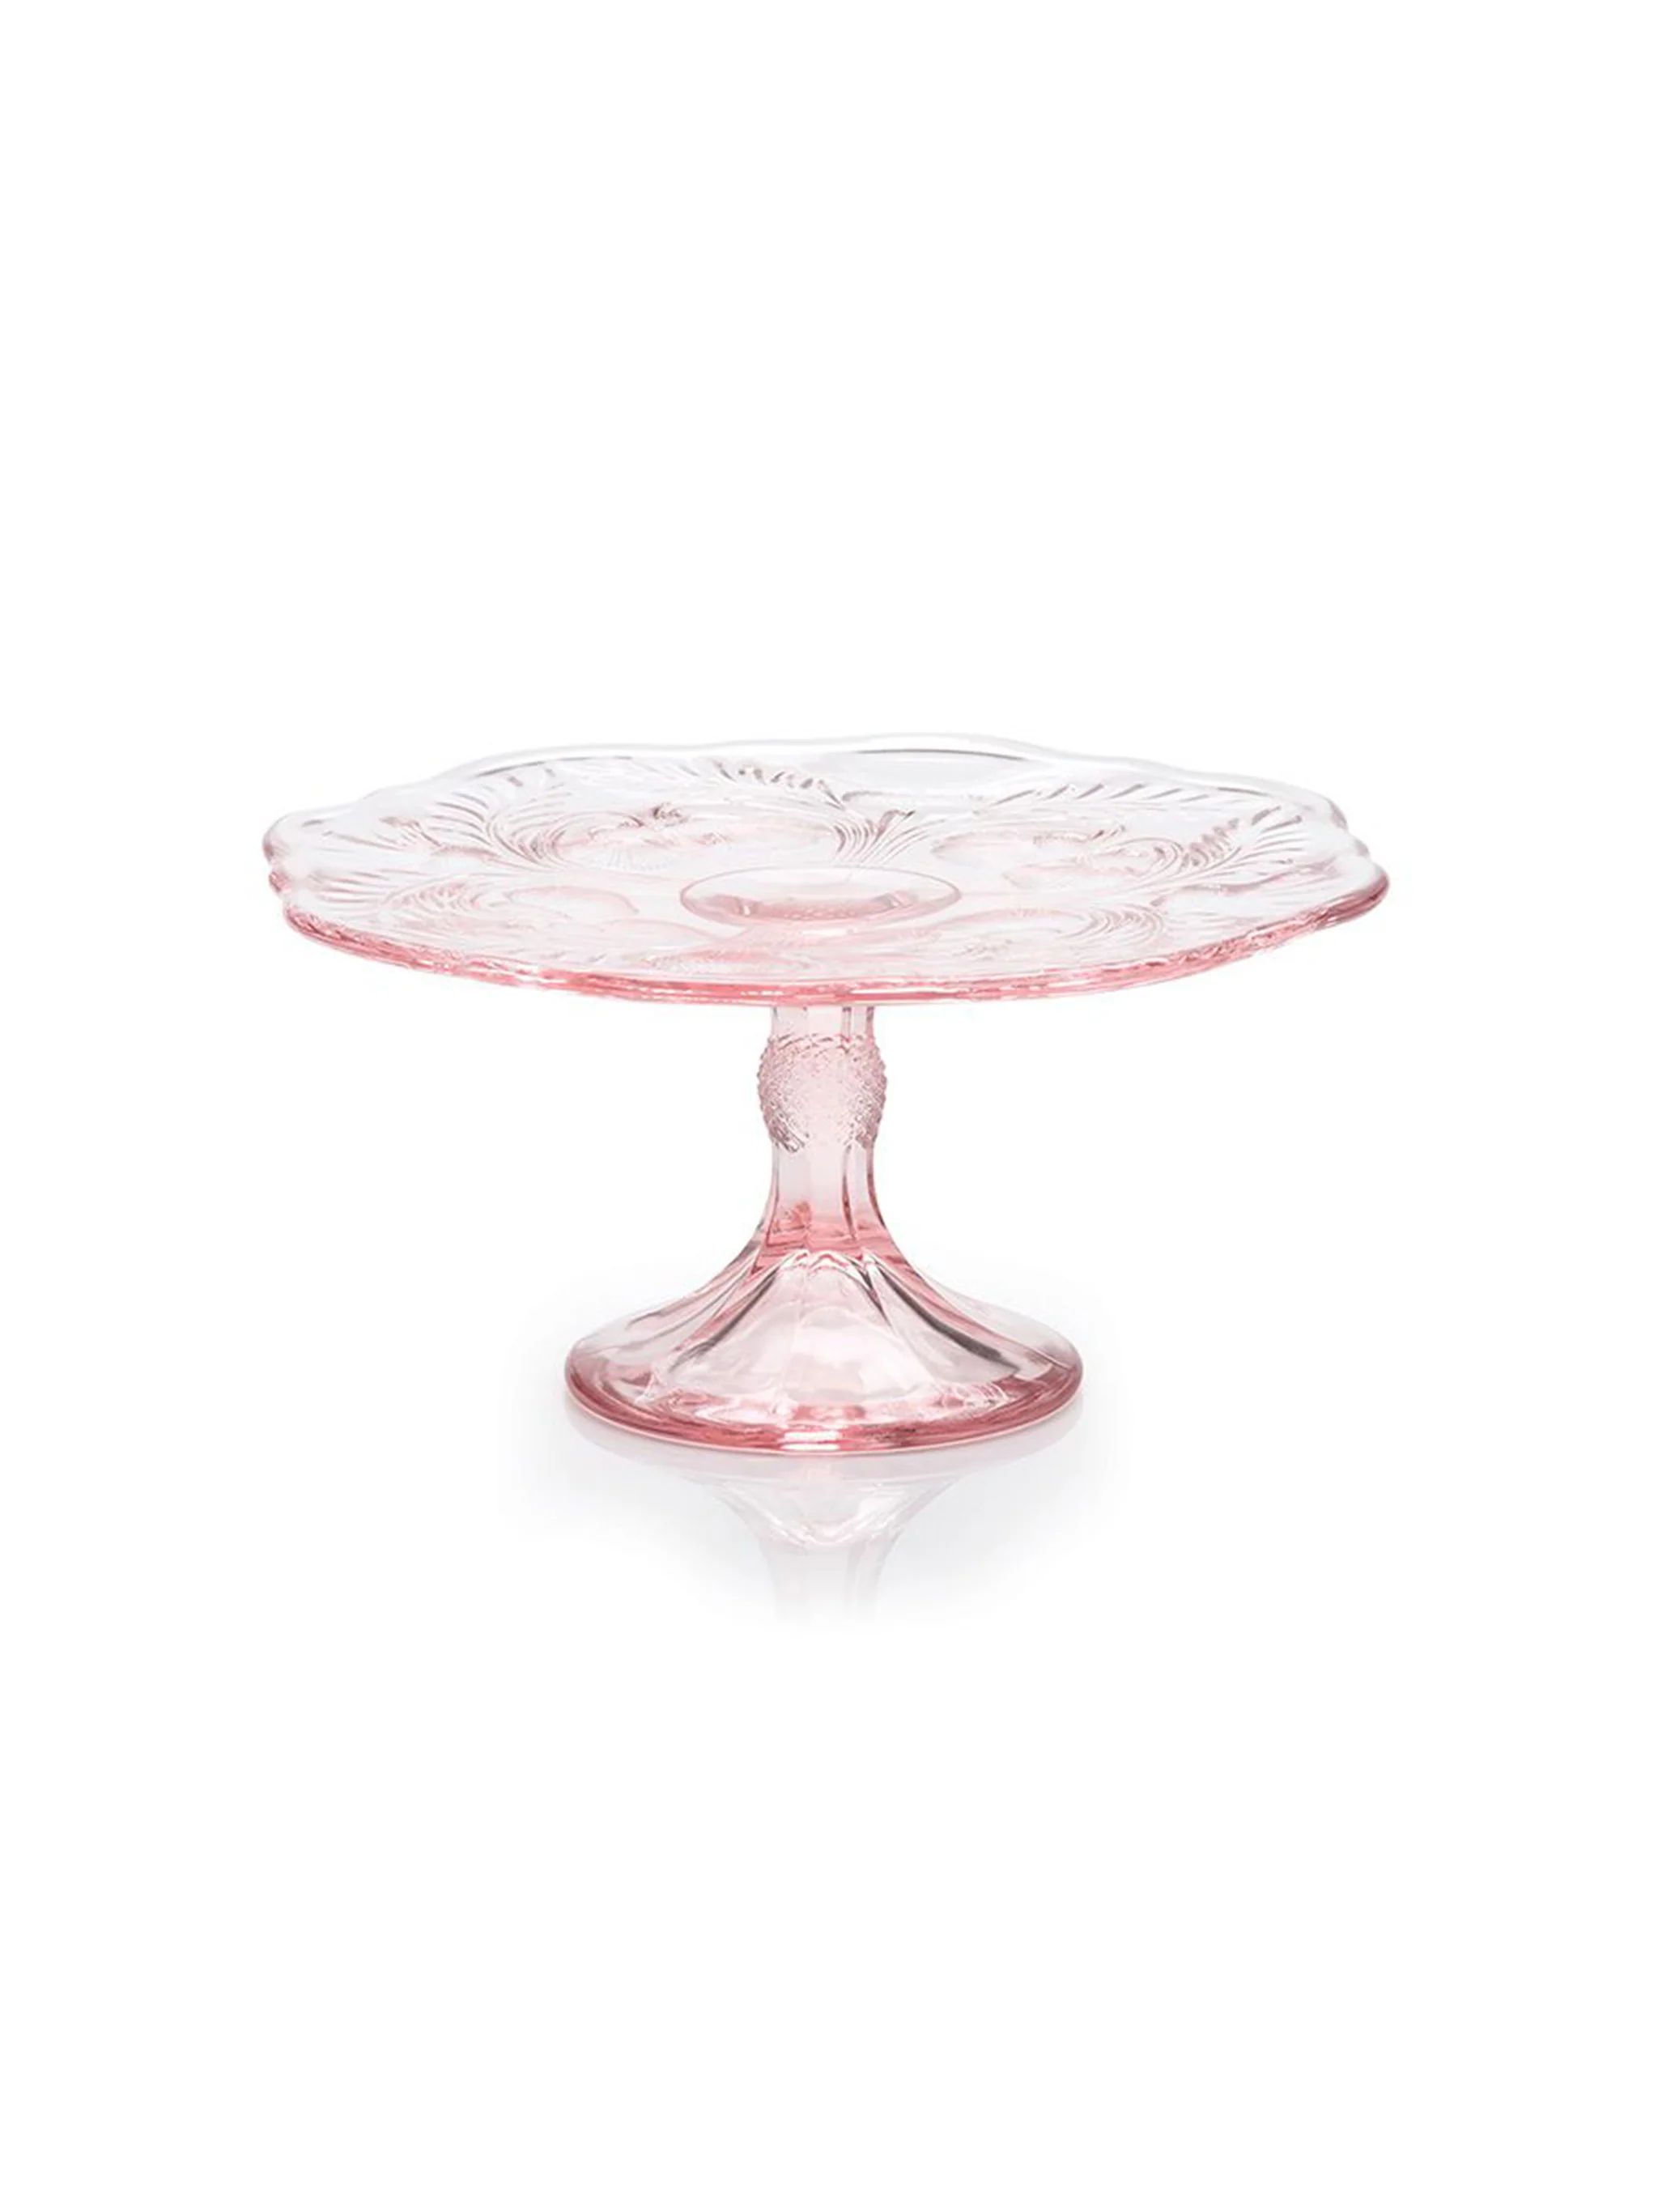 Mosser Glass Rose Thistle Cake Plate | Weston Table